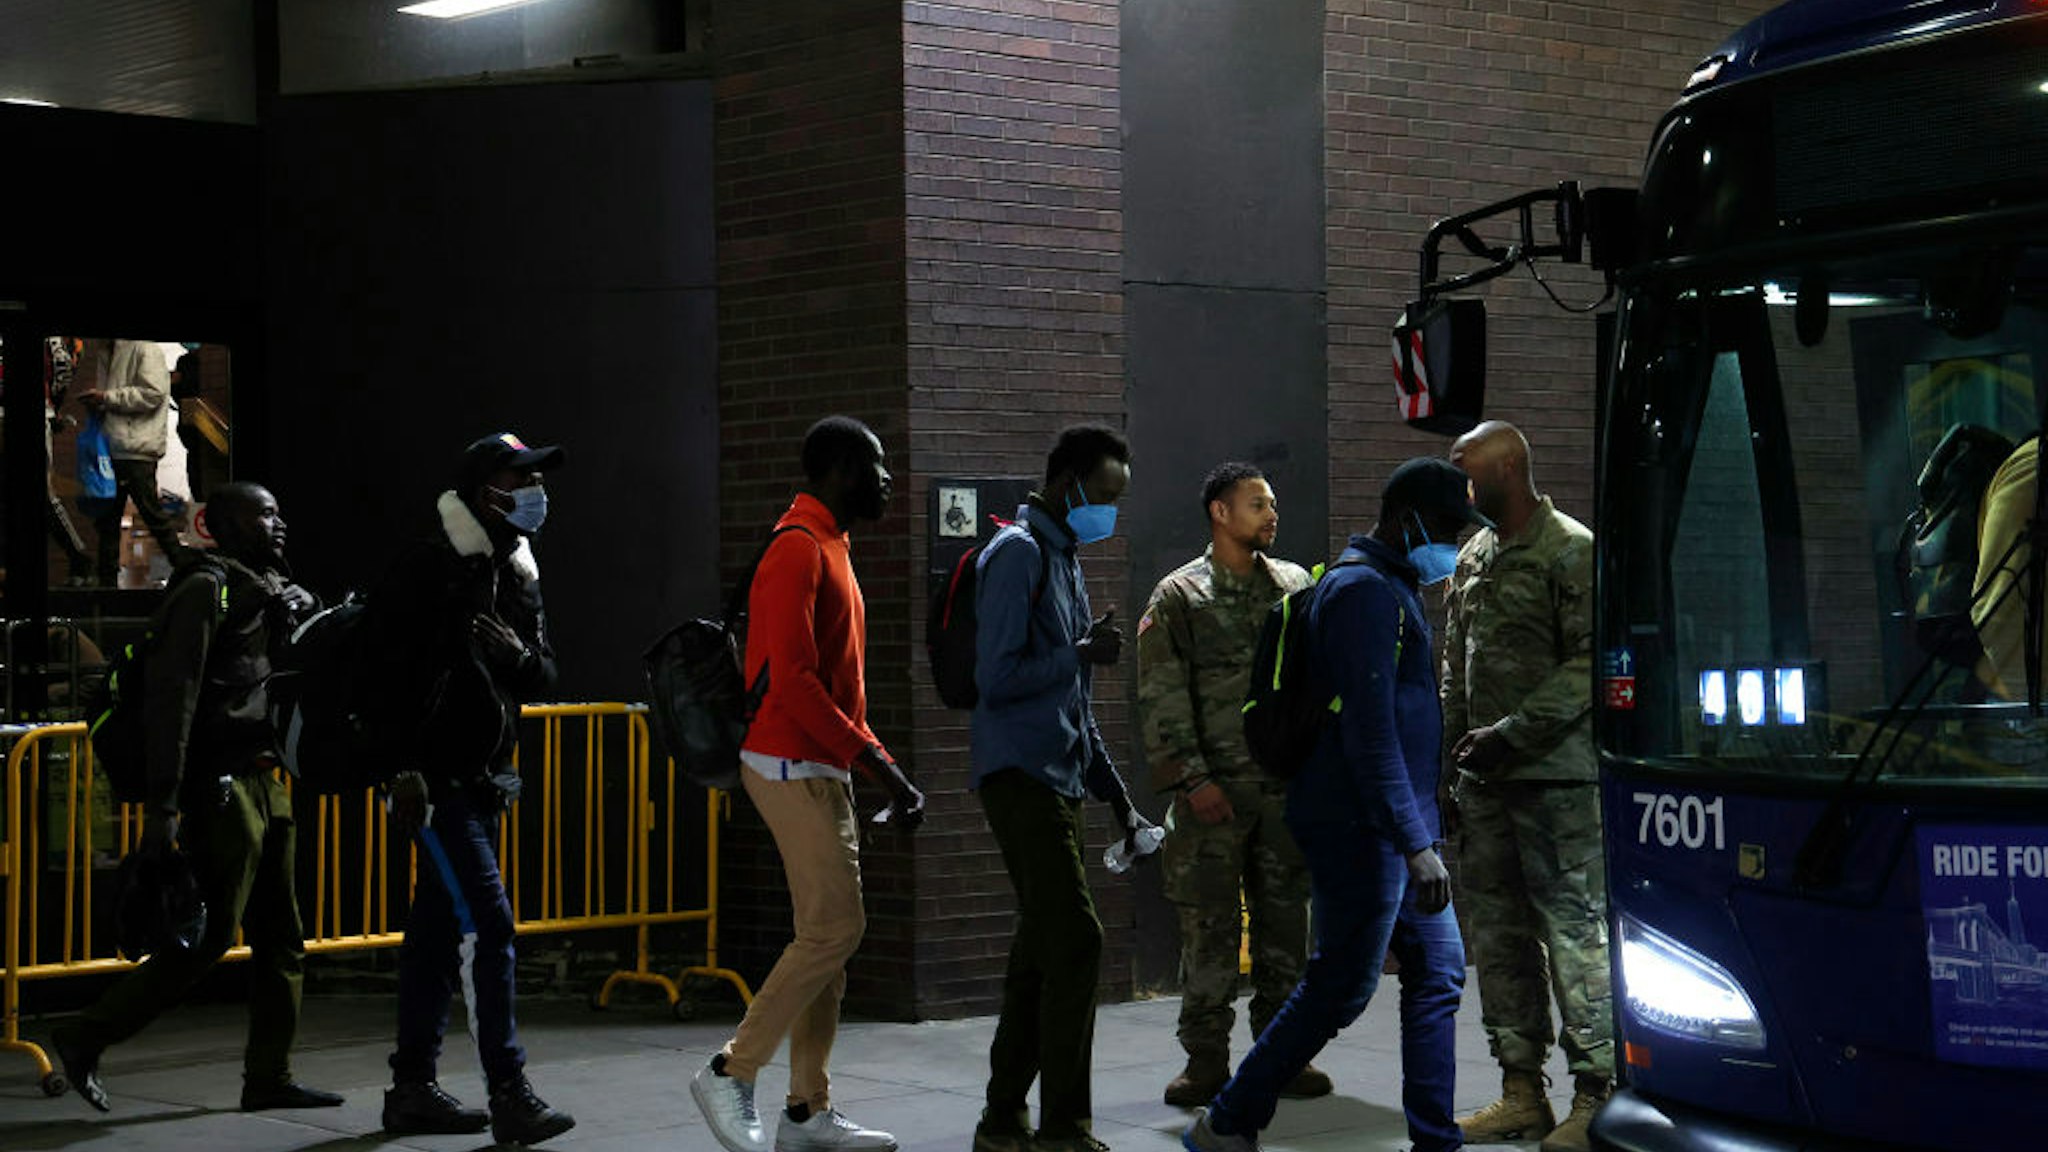 NEW YORK, NEW YORK - MAY 15: US military personnel keep watch as asylum seekers are transferred via city bus from Port Authority bus terminal to housing facilities in the Bronx and Queens on May 15, 2023 in New York City. After arriving from the Texas/Mexico border and being processed by New York City officials, the migrants are sent to various housing facilities around the NYC boroughs. In the coming days the Roosevelt Hotel will initially provide a limited number of beds and later function as a welcome and support center for the migrants. (Photo by John Lamparski/Getty Images)